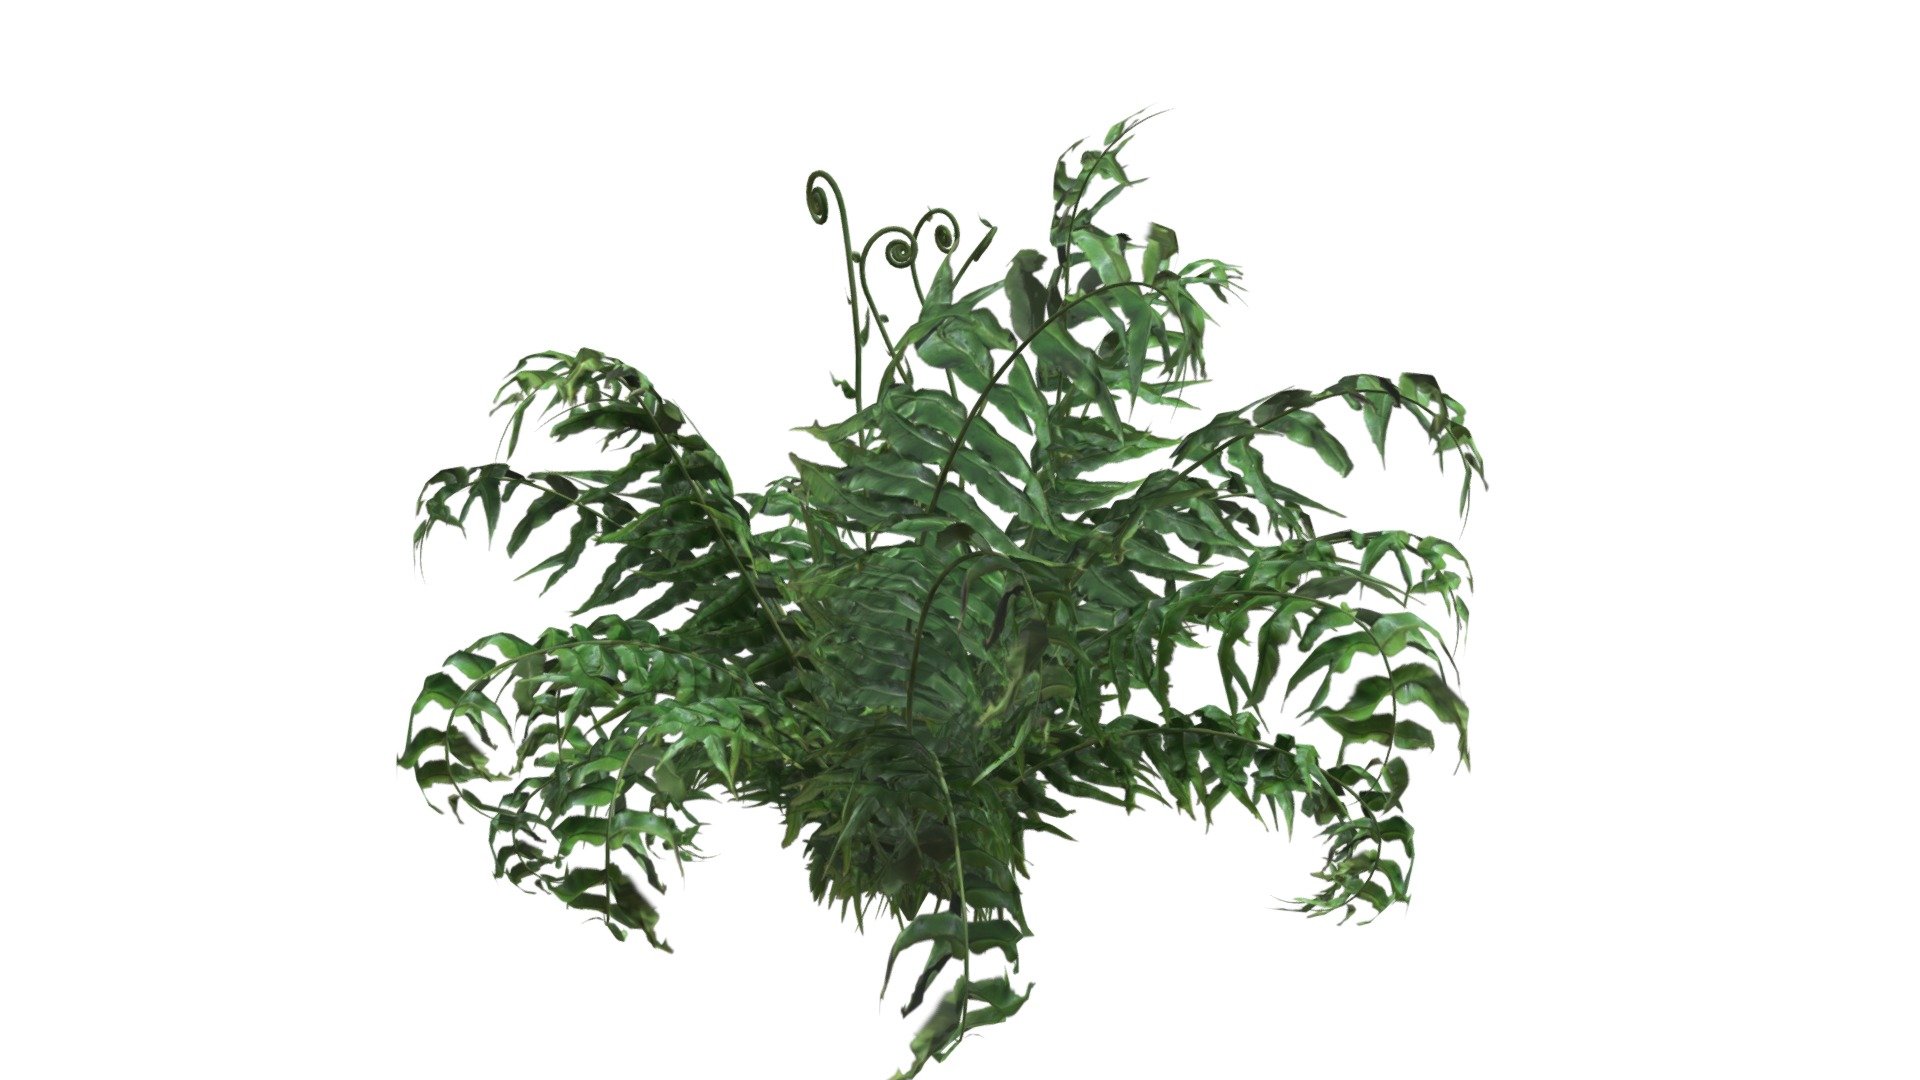 This 3D model of the Western Sword Fern Plant is a highly detailed and photorealistic option suitable for architectural, landscaping, and video game projects. The model is designed with carefully crafted textures that mimic the natural beauty of a real Western Sword Fern Plant. Its versatility allows it to bring a touch of realism to any project, whether it's a small architectural rendering or a large-scale landscape design. Additionally, the model is optimized for performance and features efficient UV mapping. This photorealistic 3D model is the perfect solution for architects, landscapers, and game developers who want to enhance the visual experience of their project with a highly detailed, photorealistic Western Sword Fern Plant 3d model